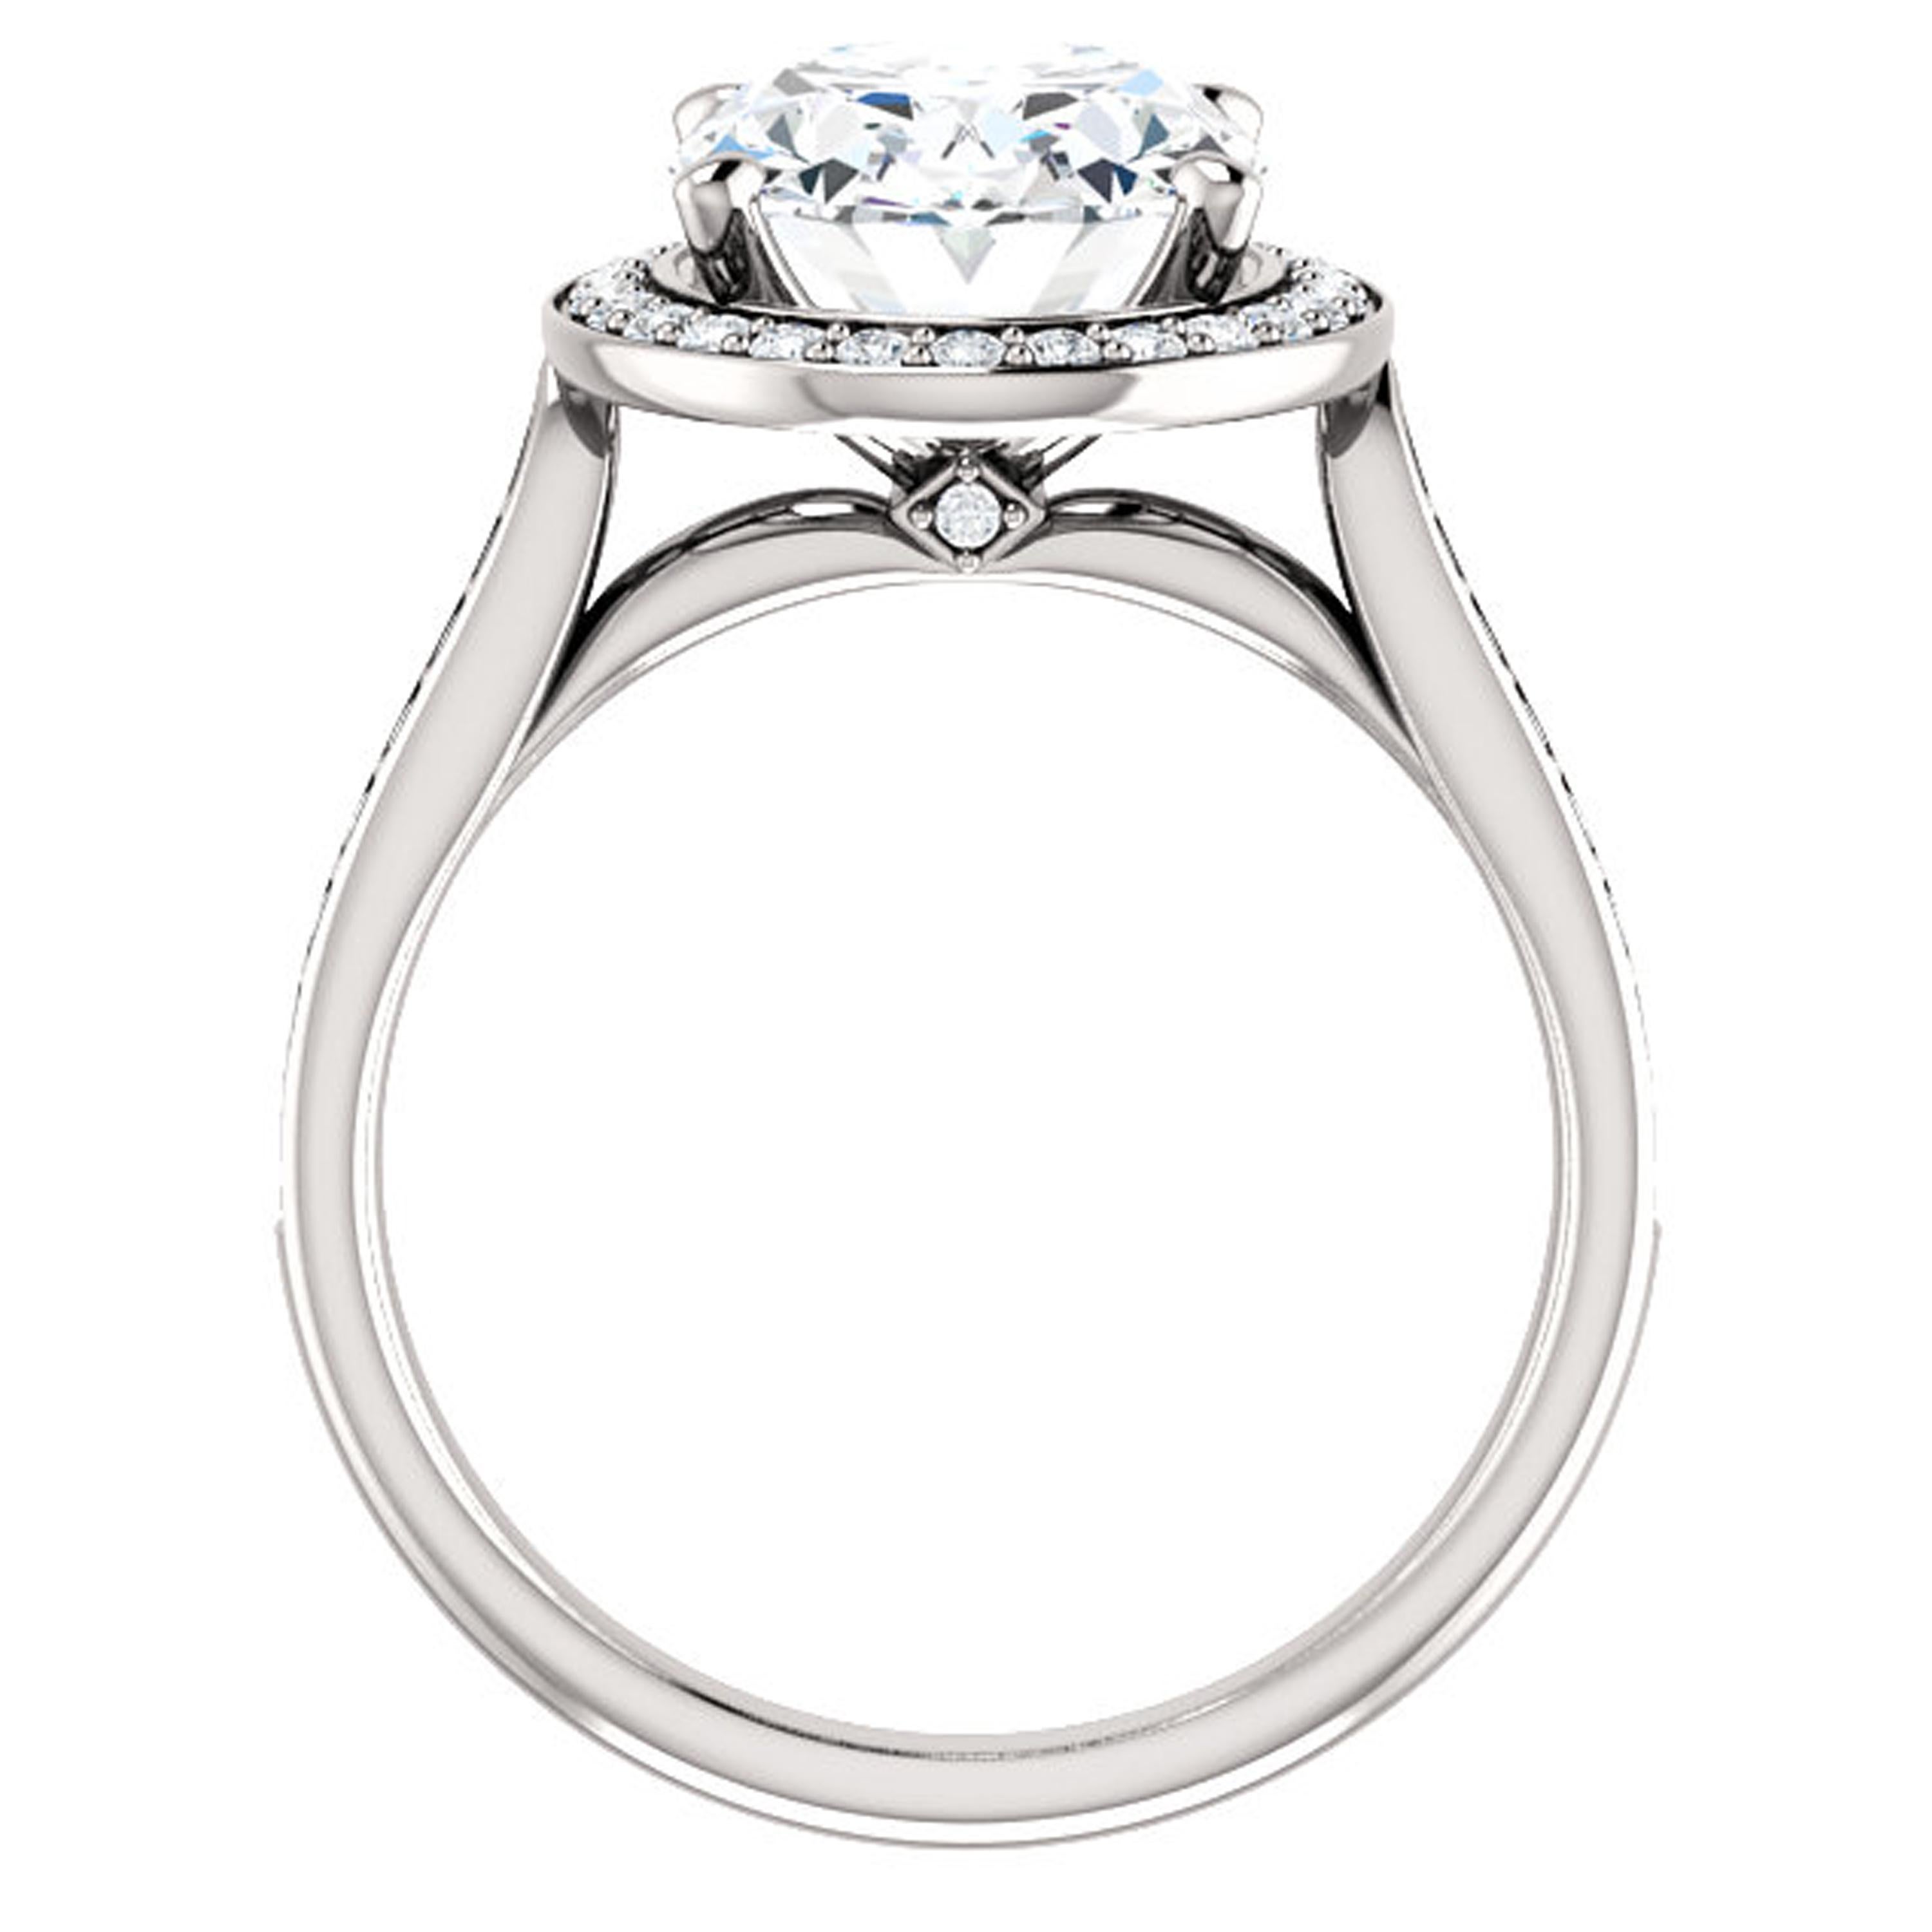 The arches of this cathedral style engagement ring rise up to reach the shimmering center Forever One oval moissanite center stone. Dazzling diamonds line the shank and surround the halo, amplifying the canter stone. 

Style No. :